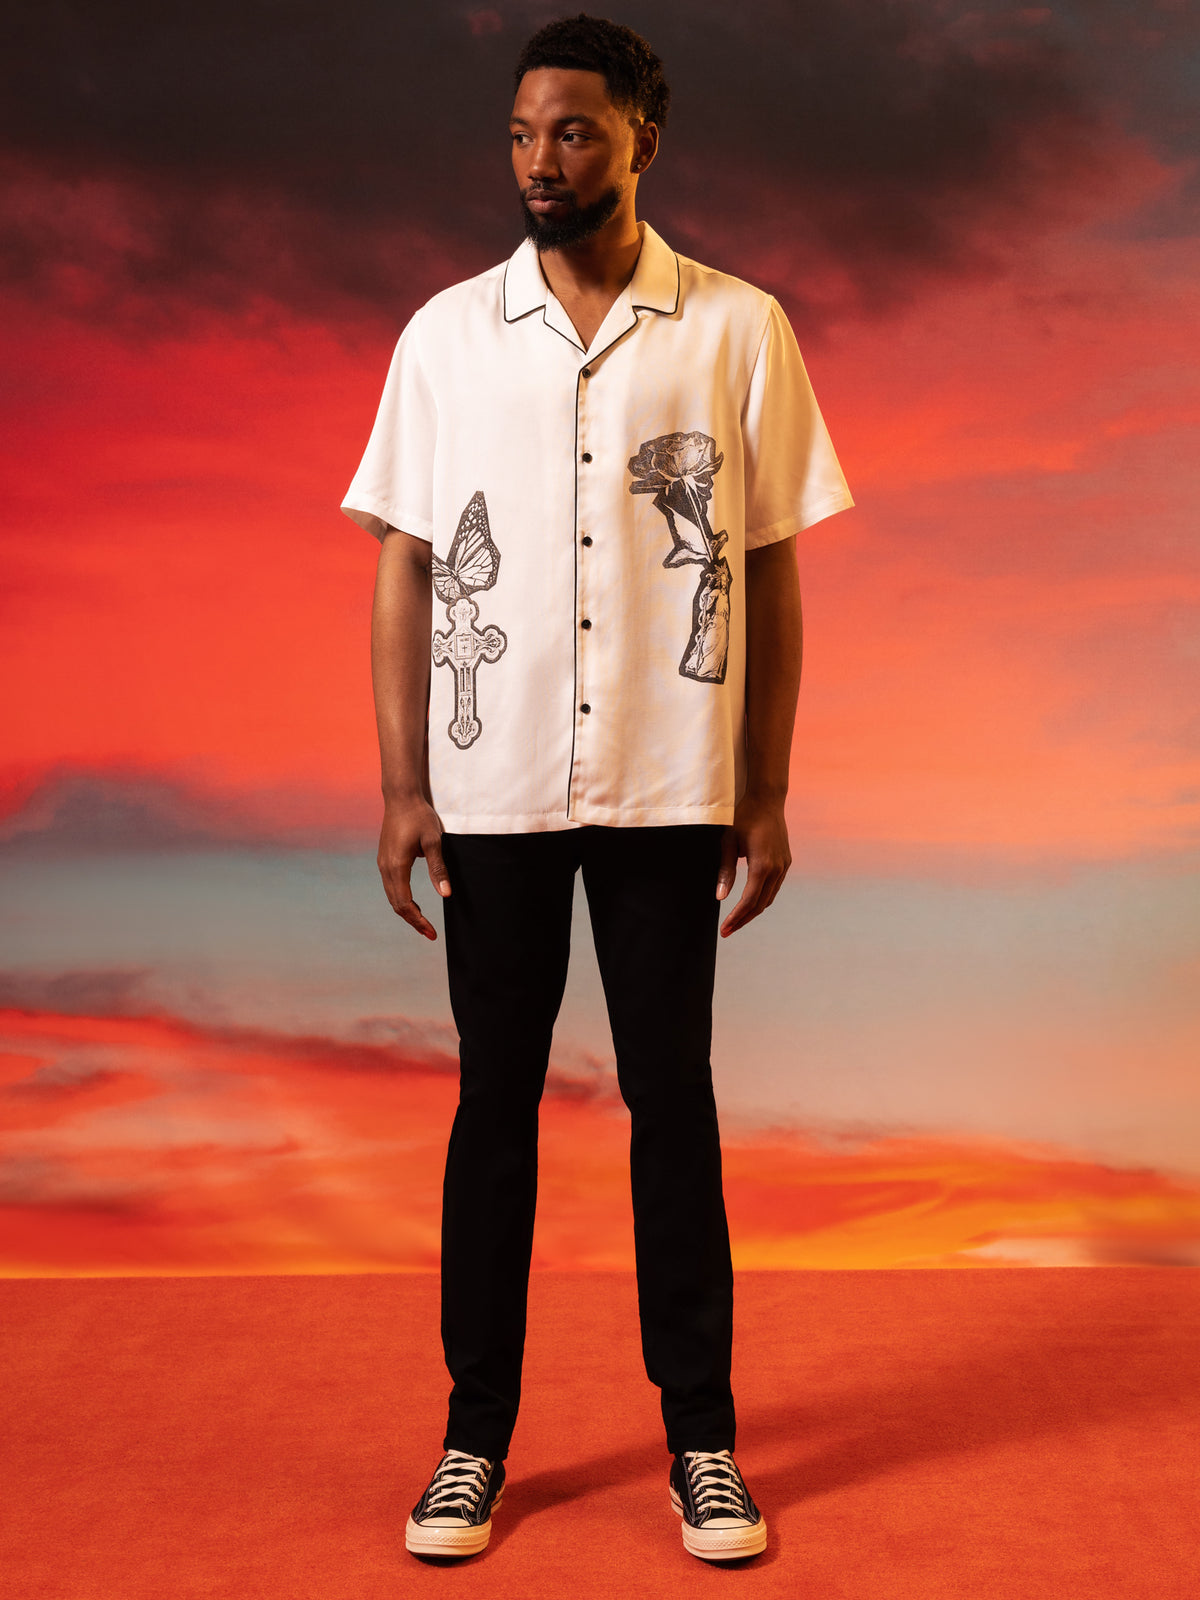 Kut Out Resort Shirt in White